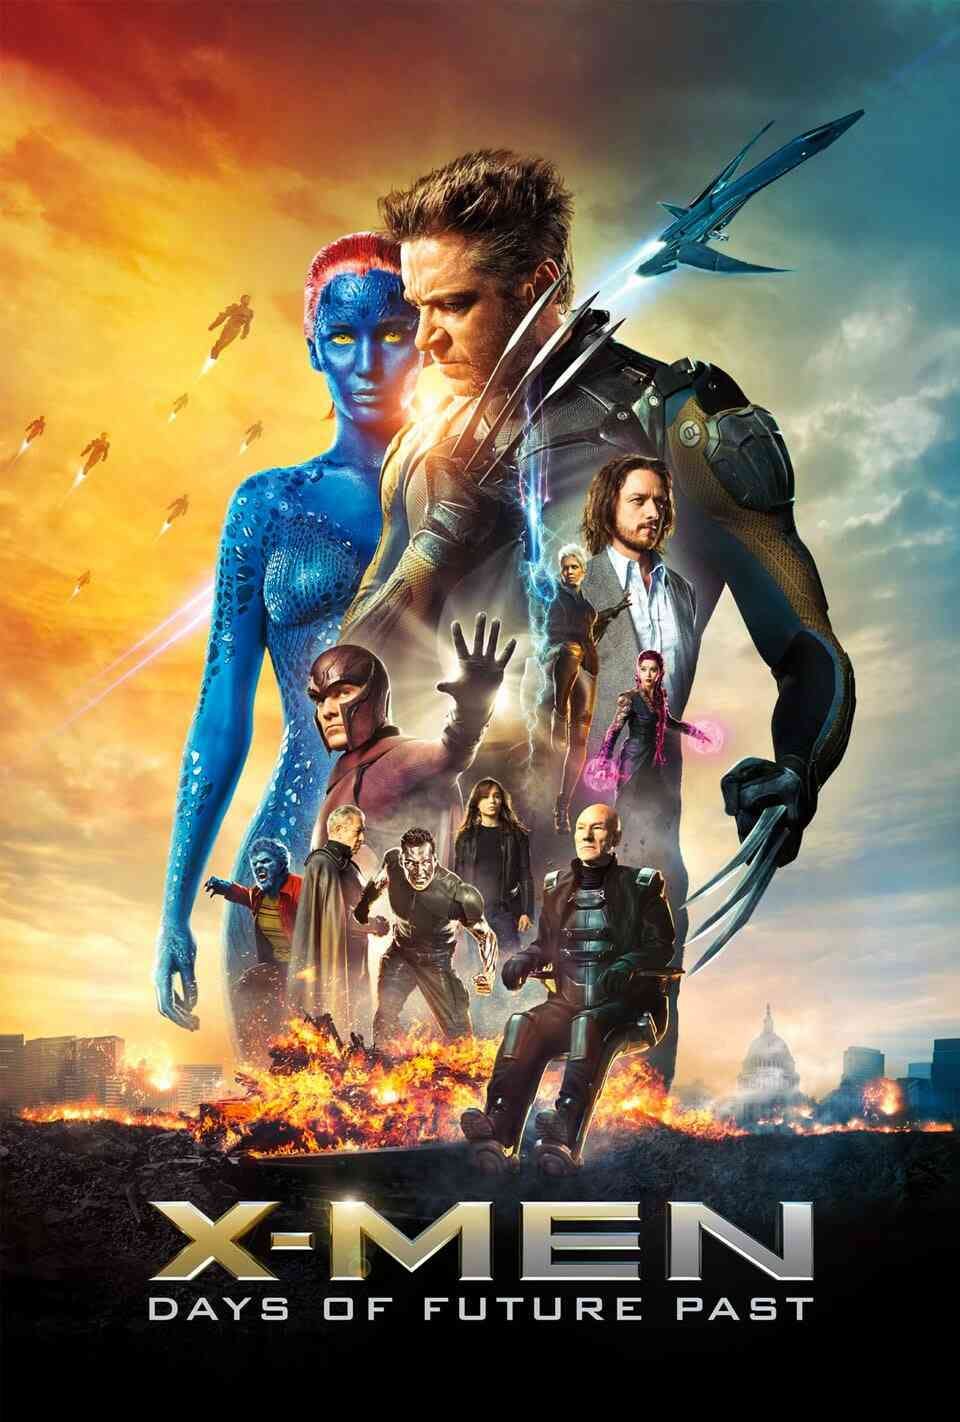 Read Days of Future Past screenplay.